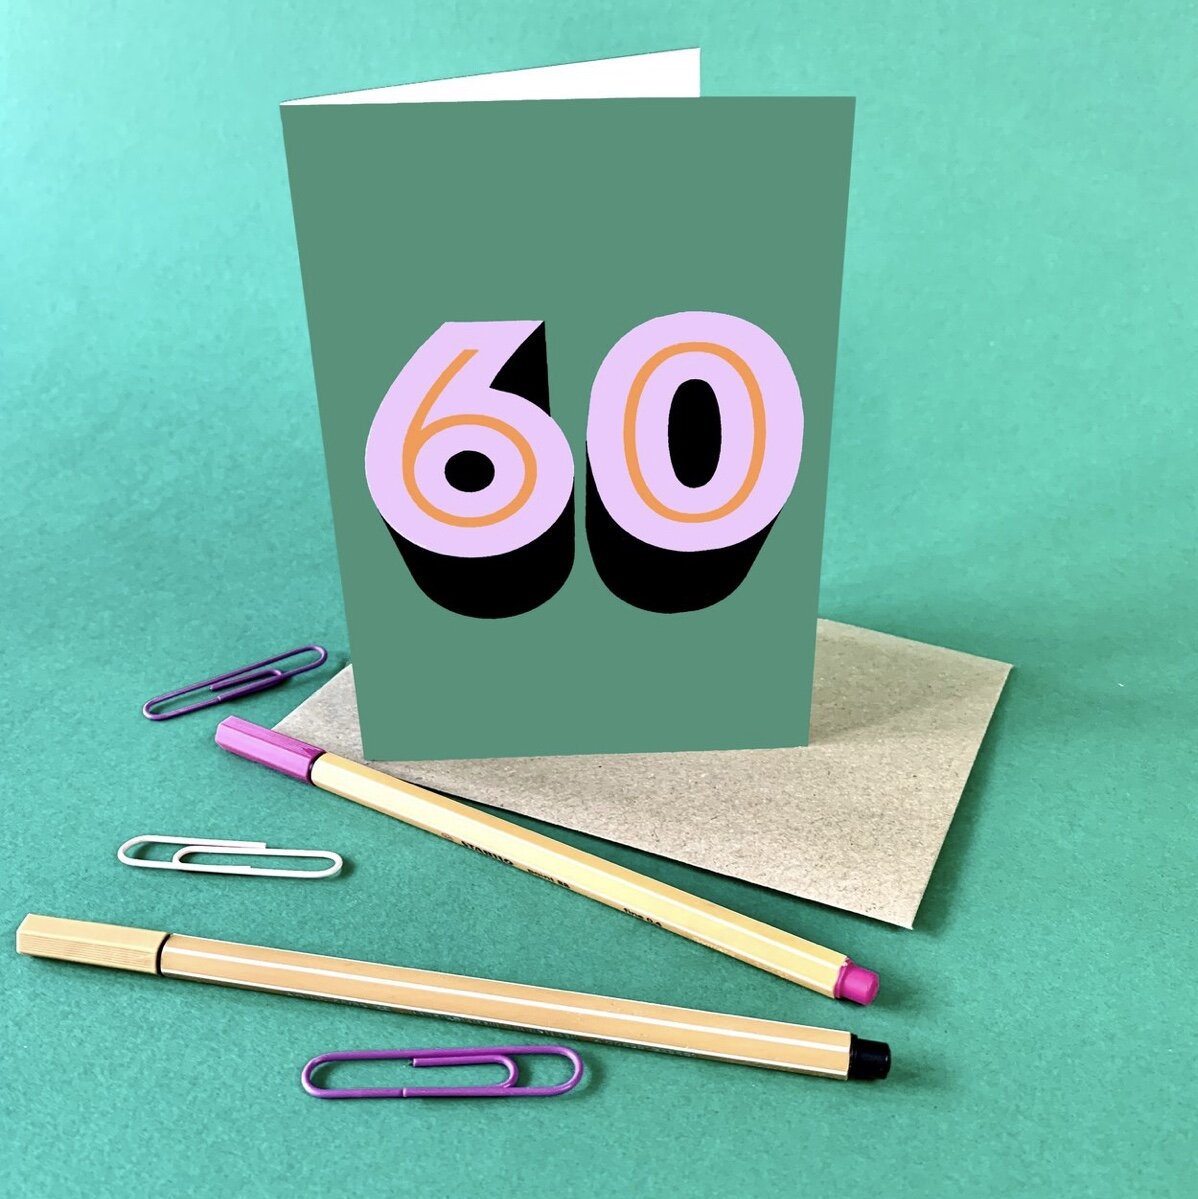 60 | CARD BY MAX MADE ME DO IT